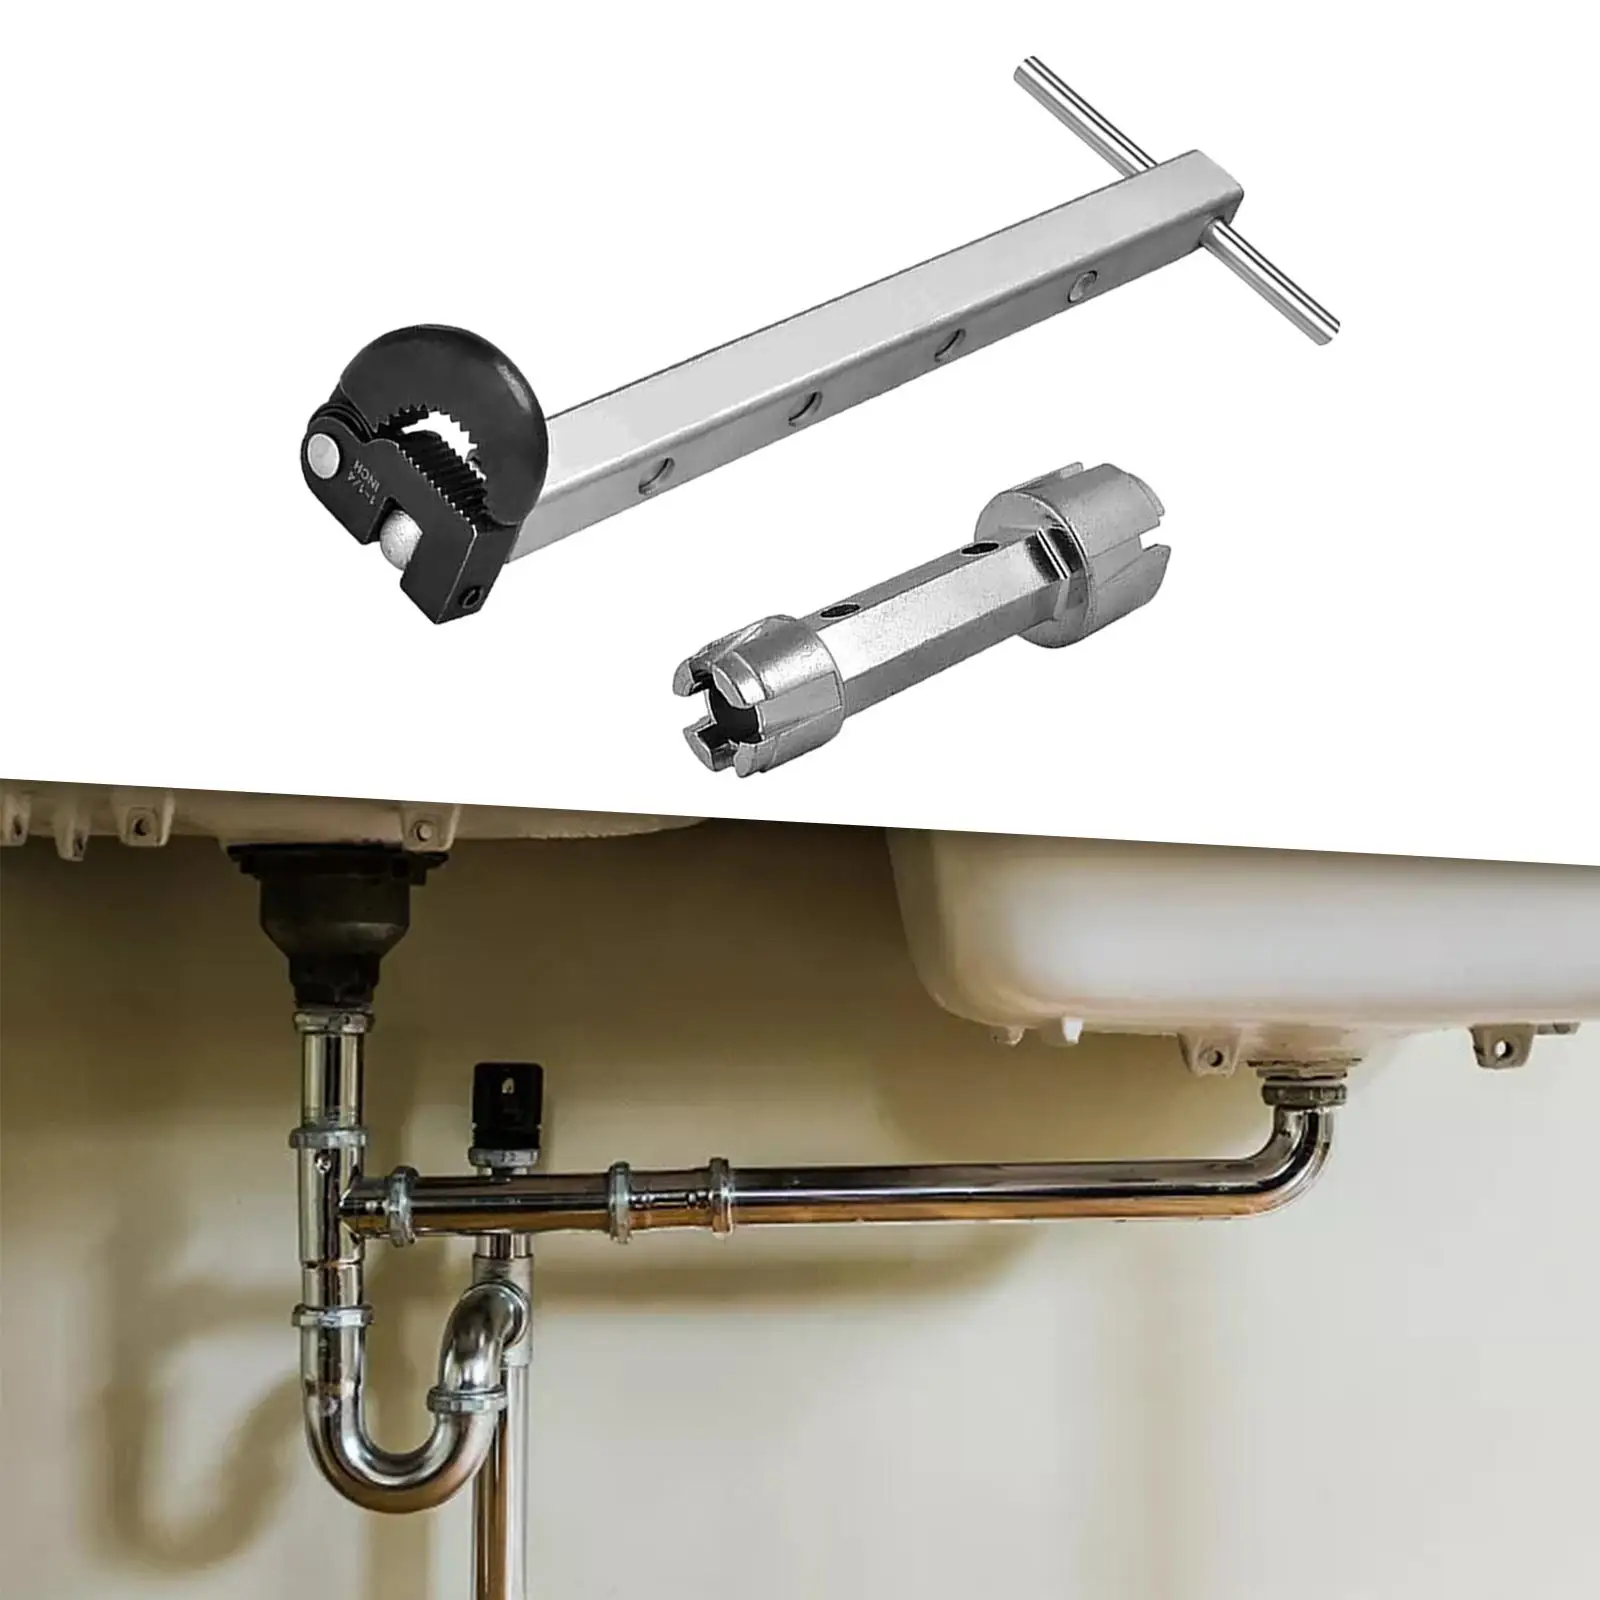 Telescoping Basin Wrench and Tub Drain Remover Wrench Accessory Sink Wrench